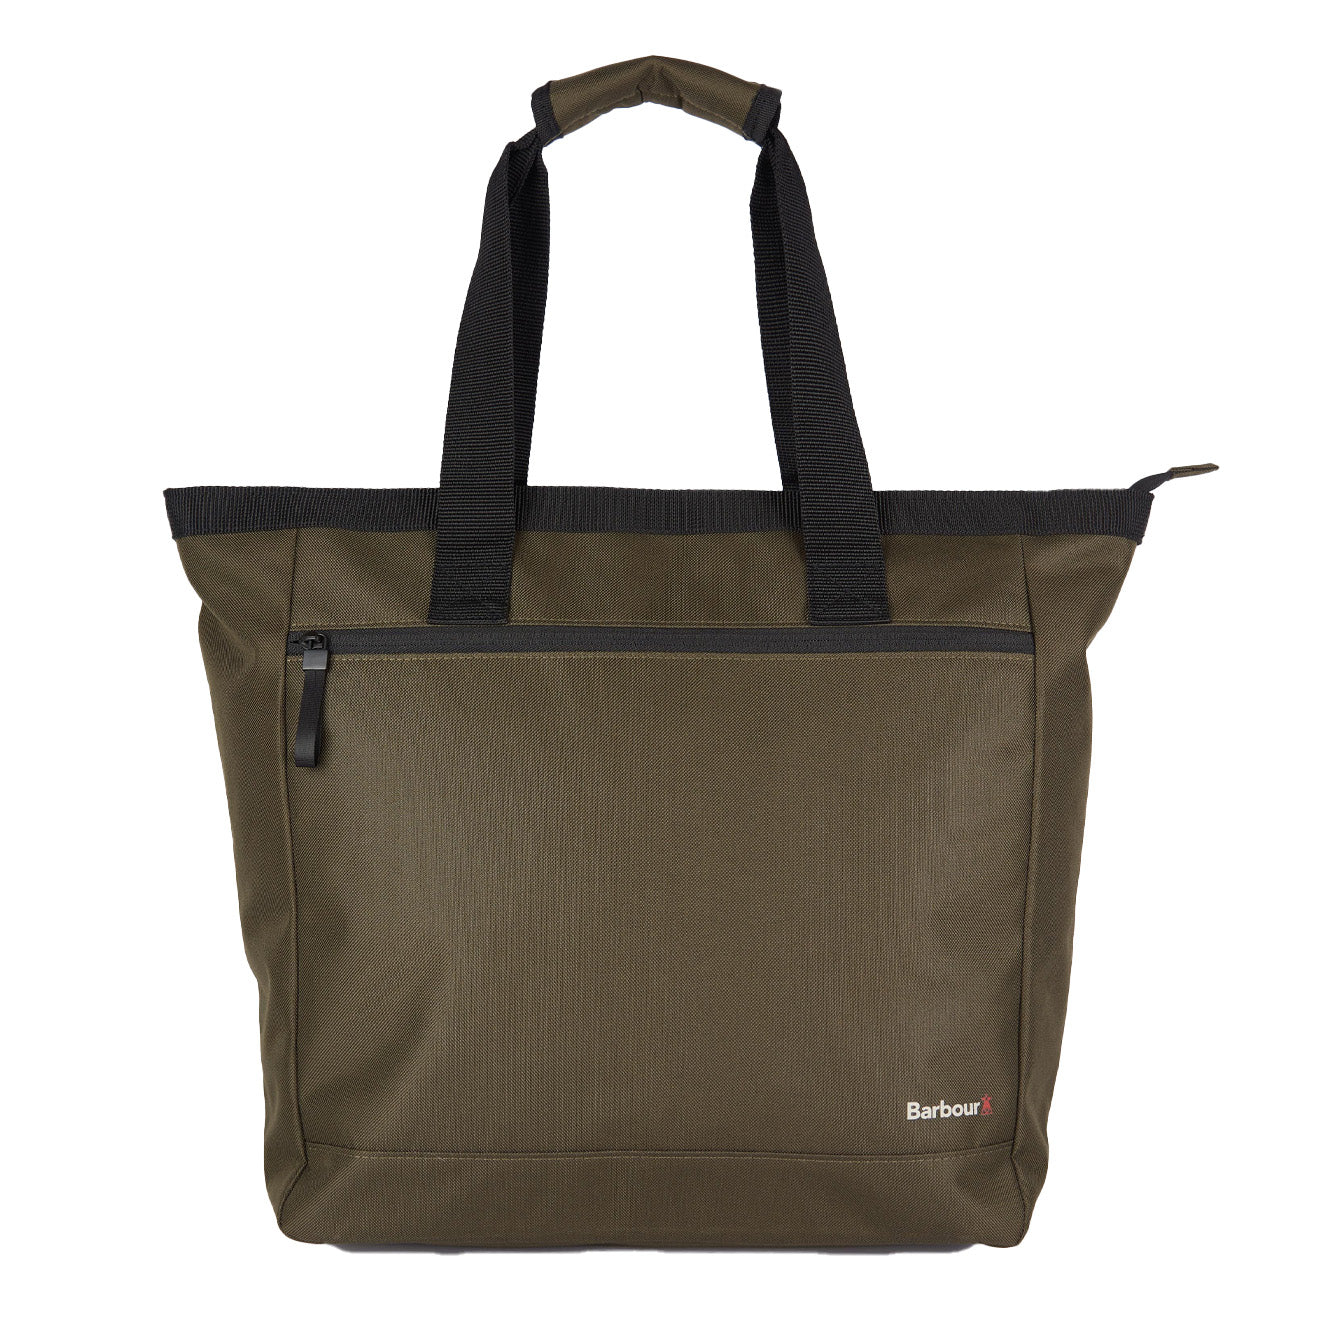 Barbour Arwin Canvas Tote Bag Olive / Black – Yards Store Menswear